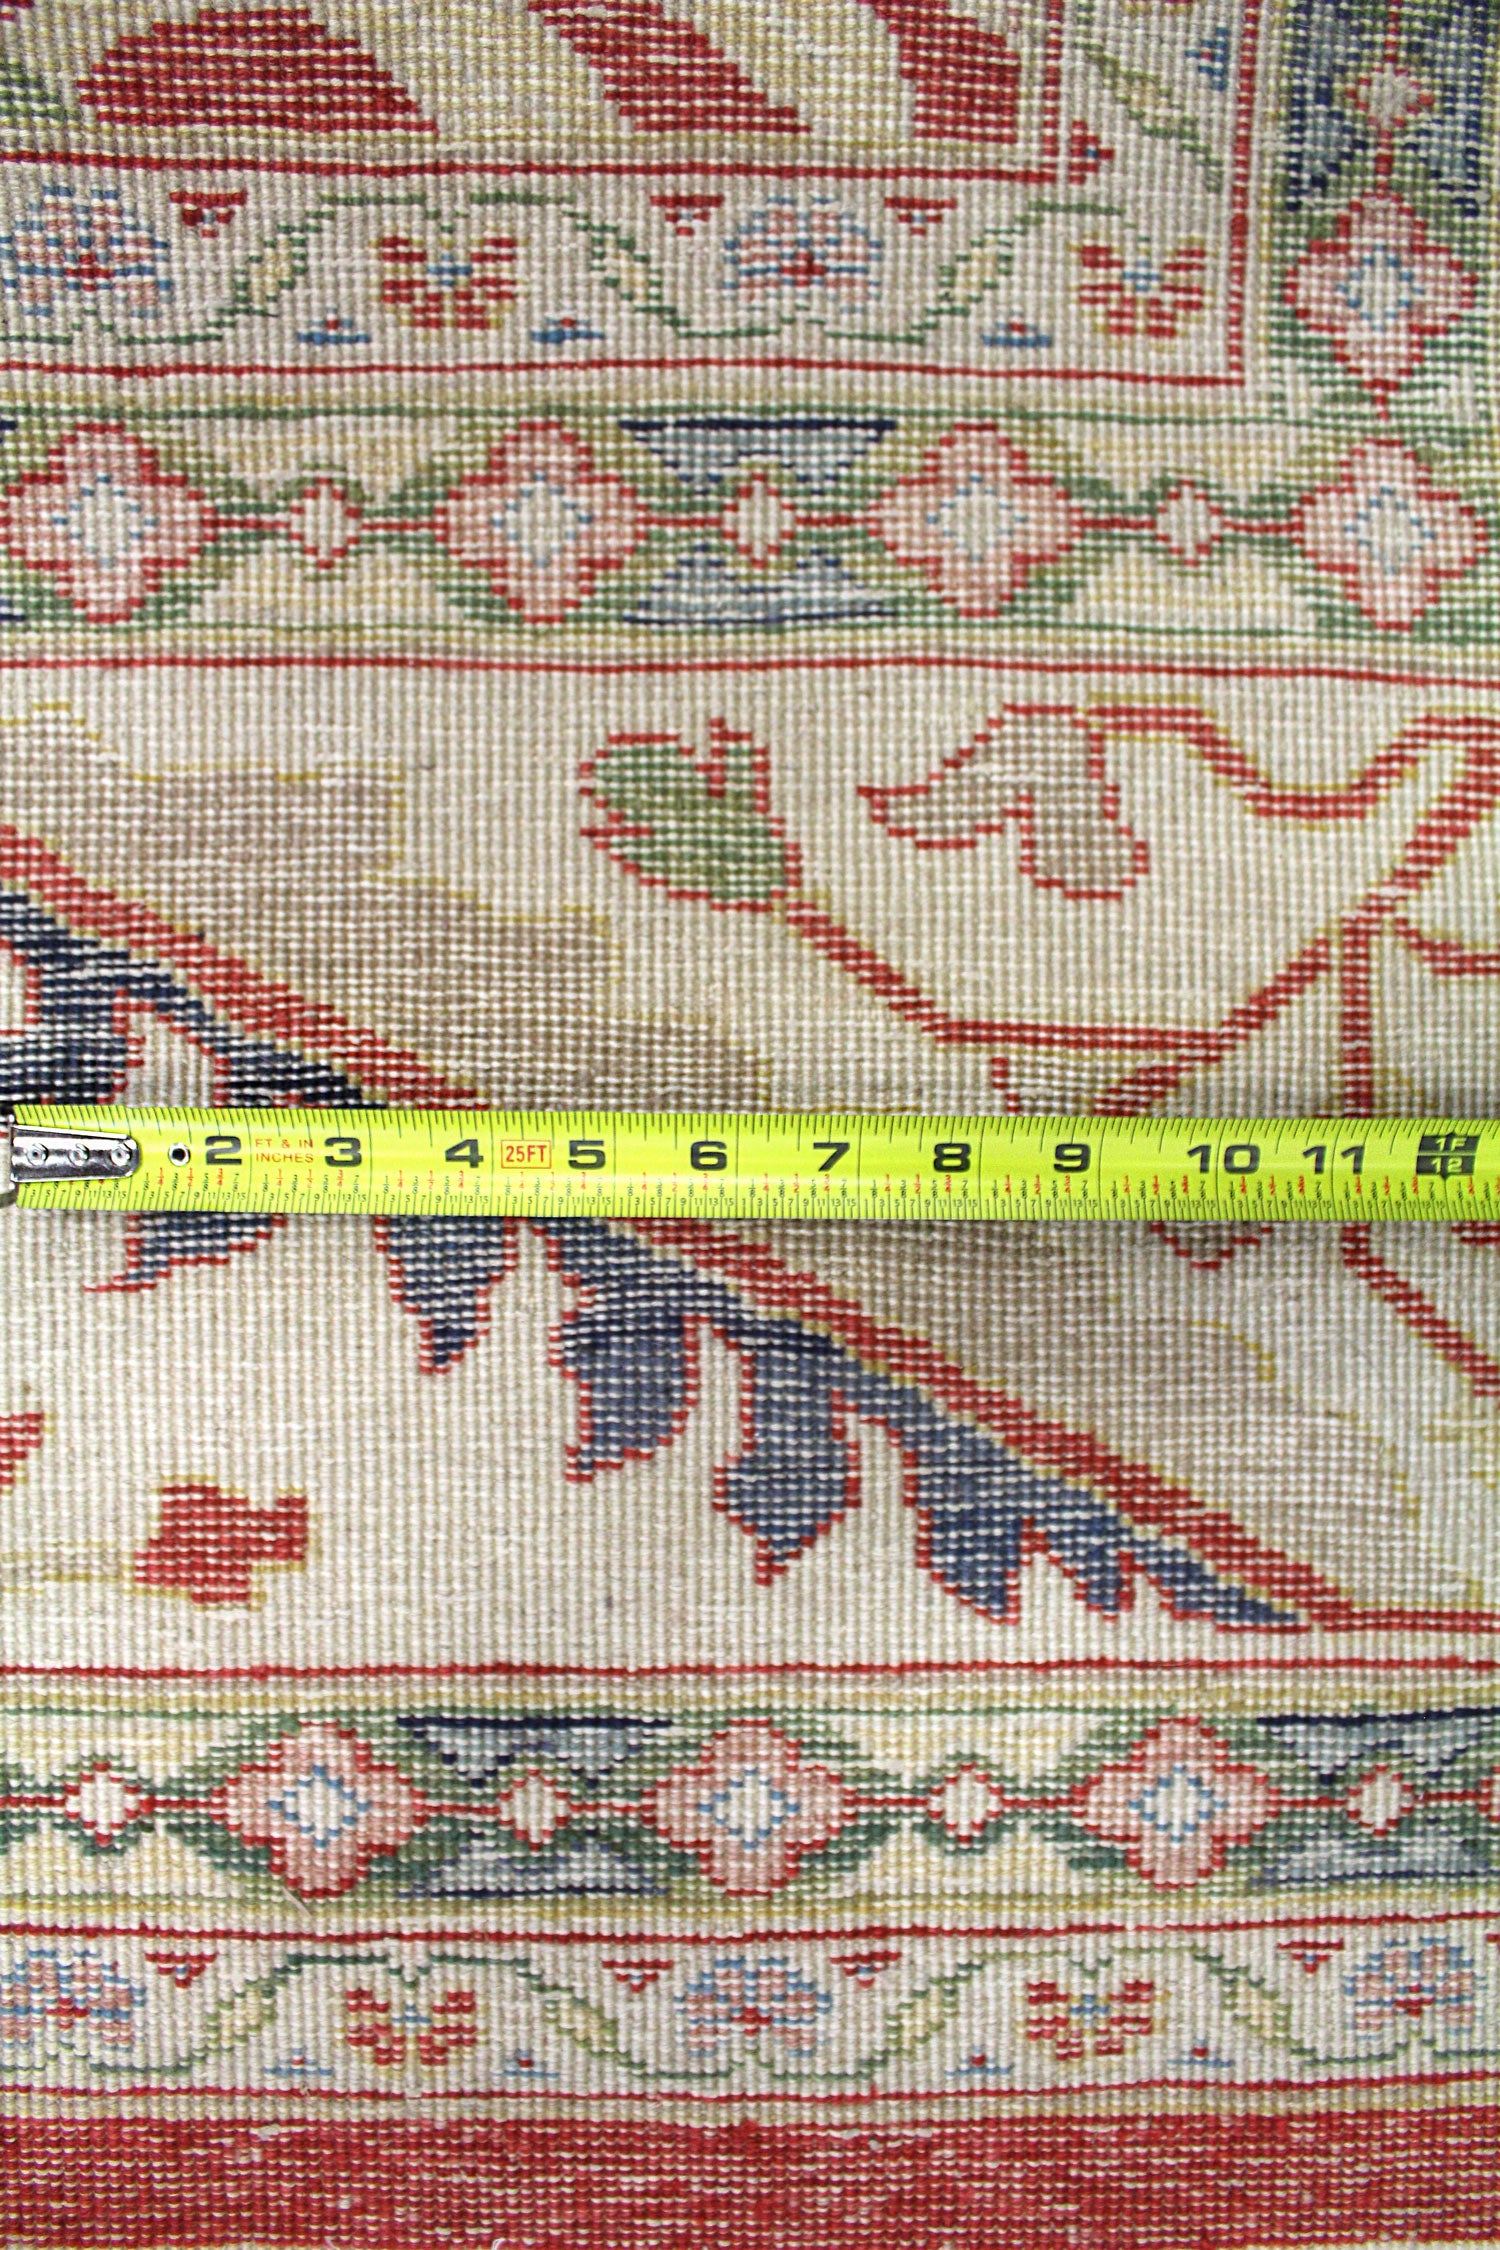 Sultanabad Handwoven Traditional Rug, 61131